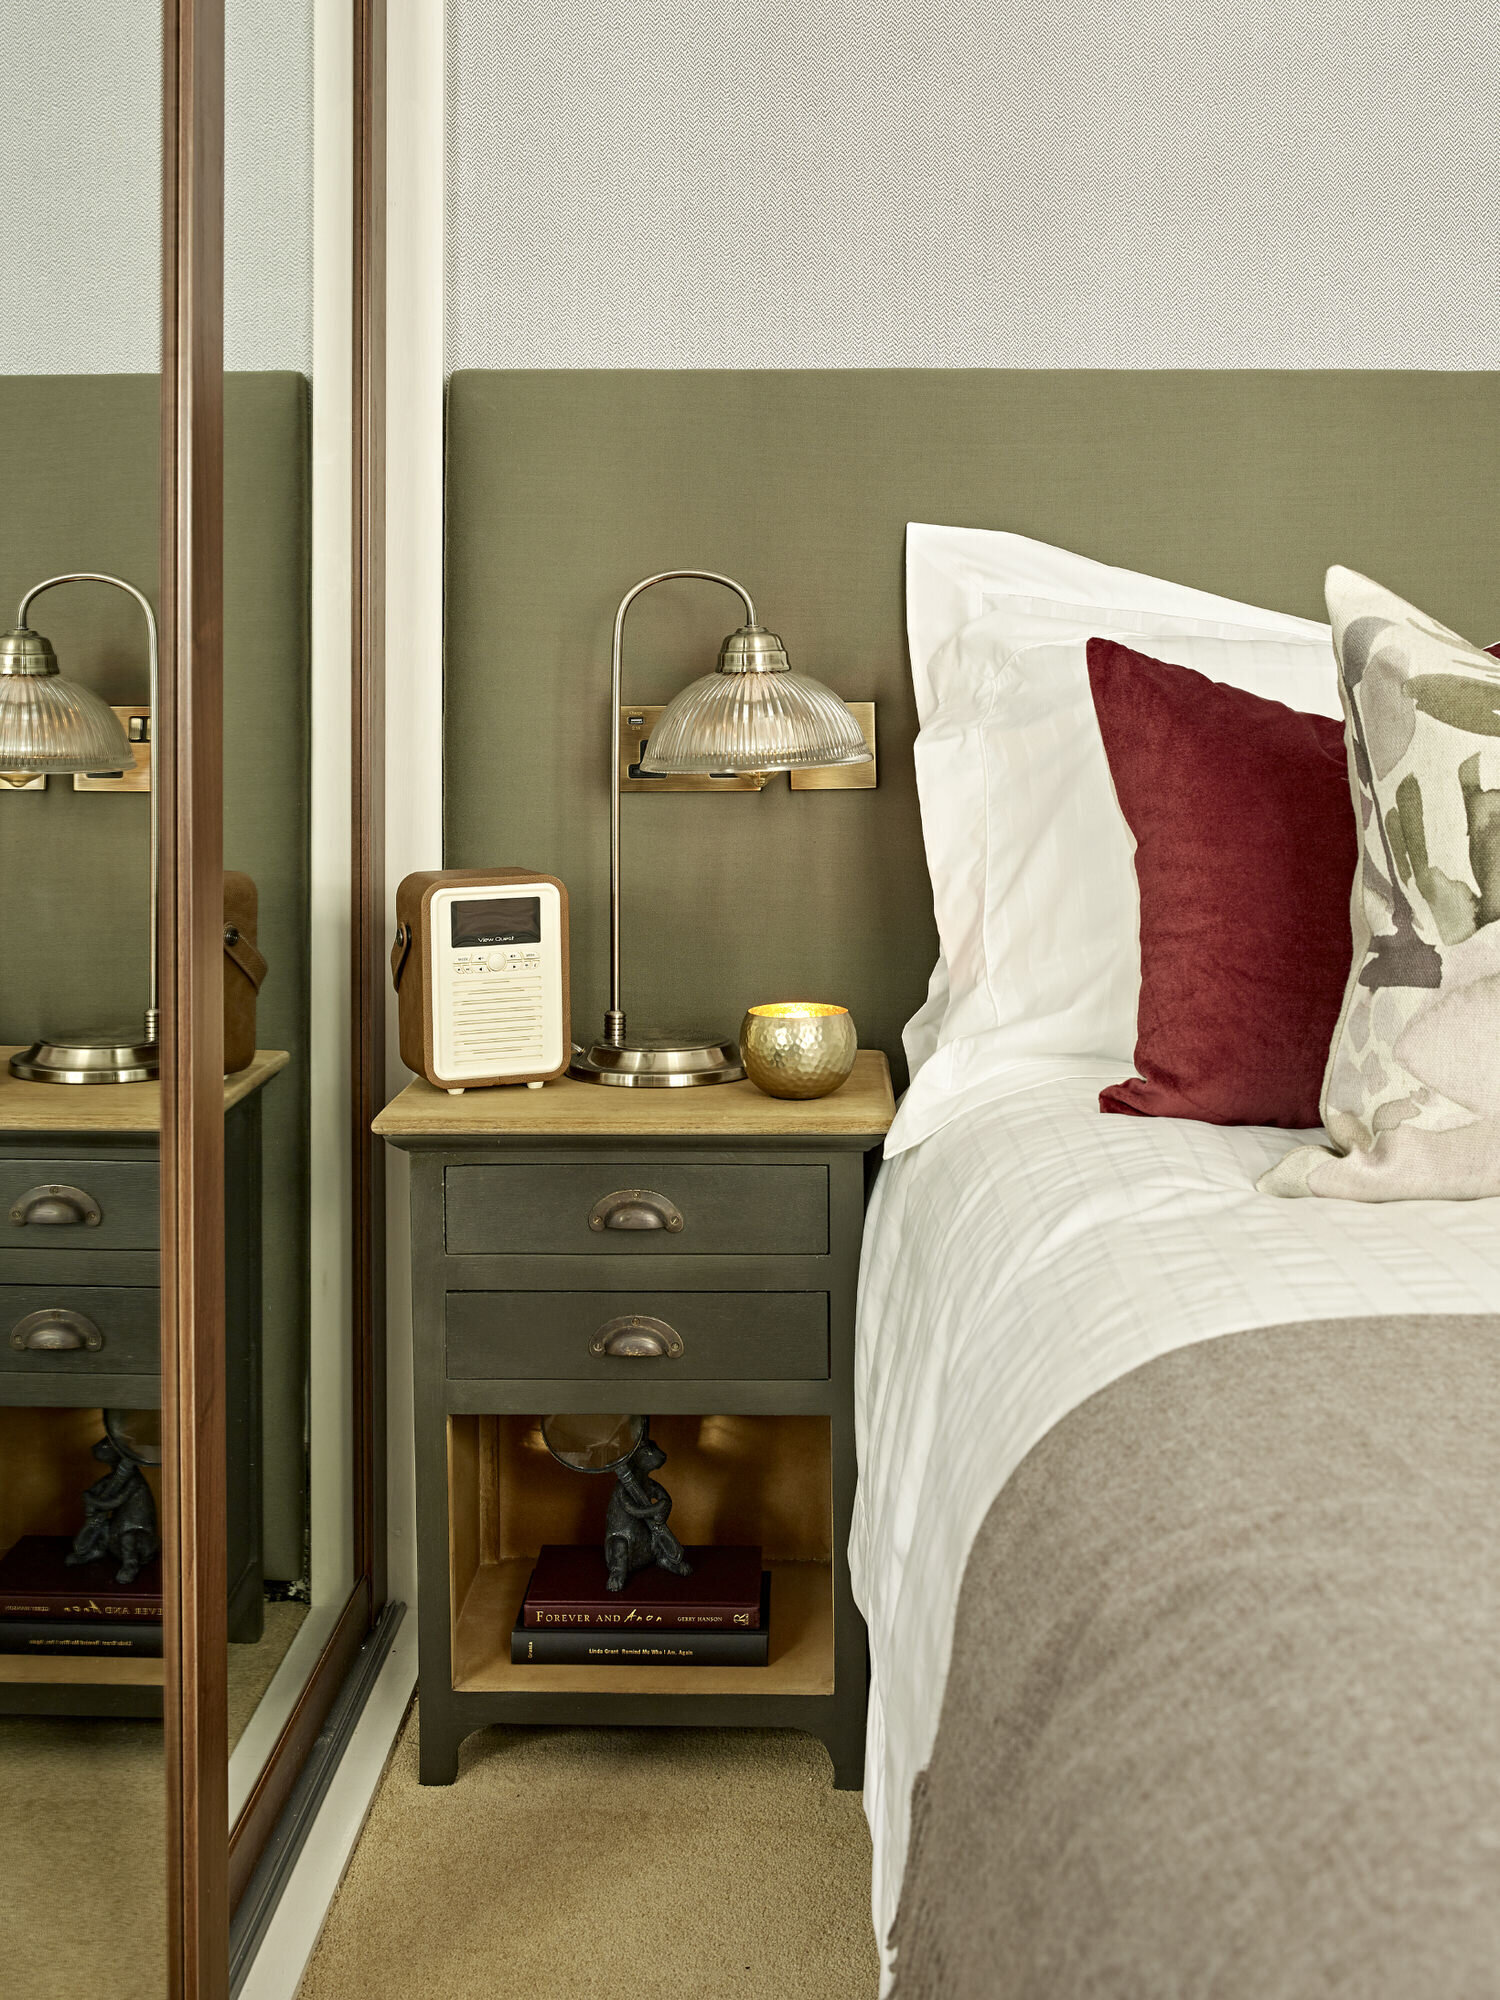 bedroom suite with mirrored wardrobe and maroon pillows on white bed.